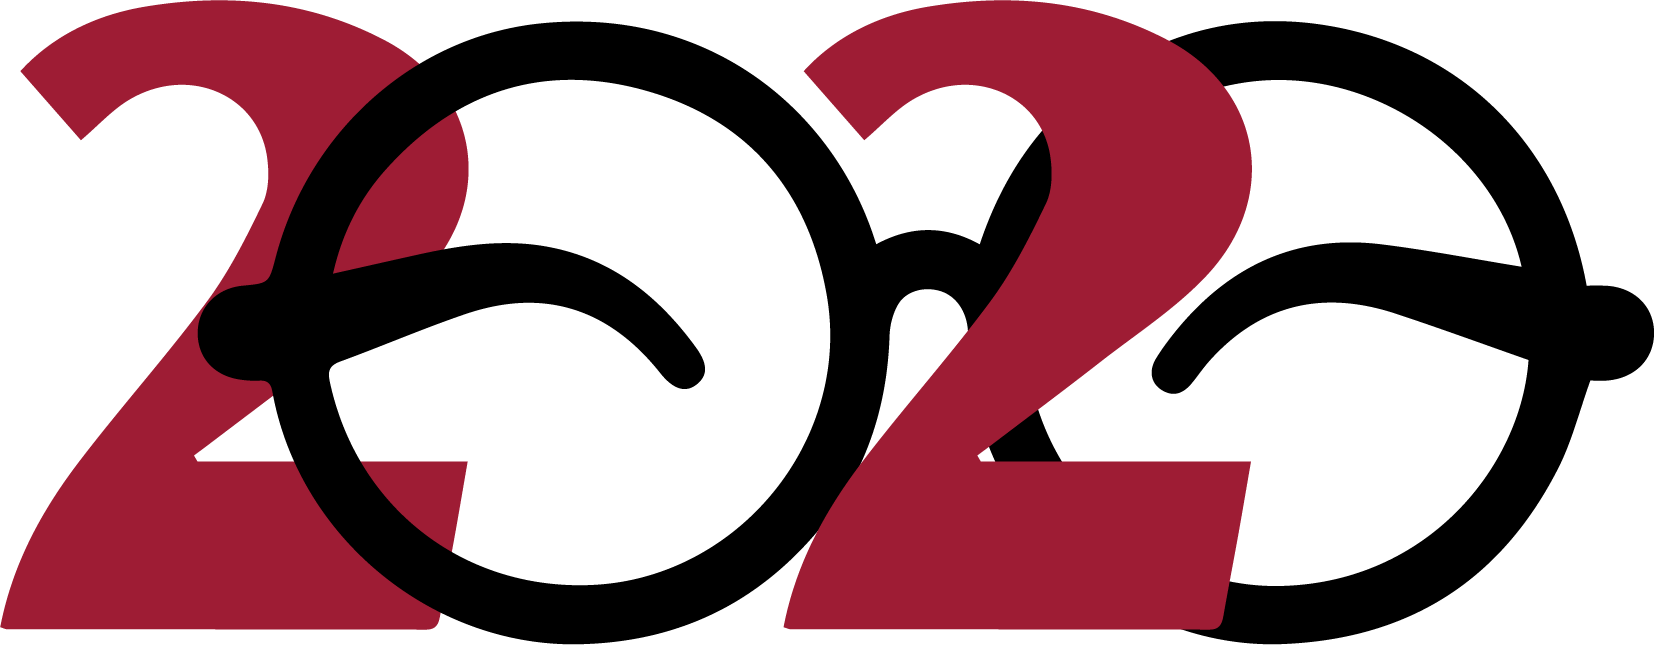 2020 Search Partners logo icon